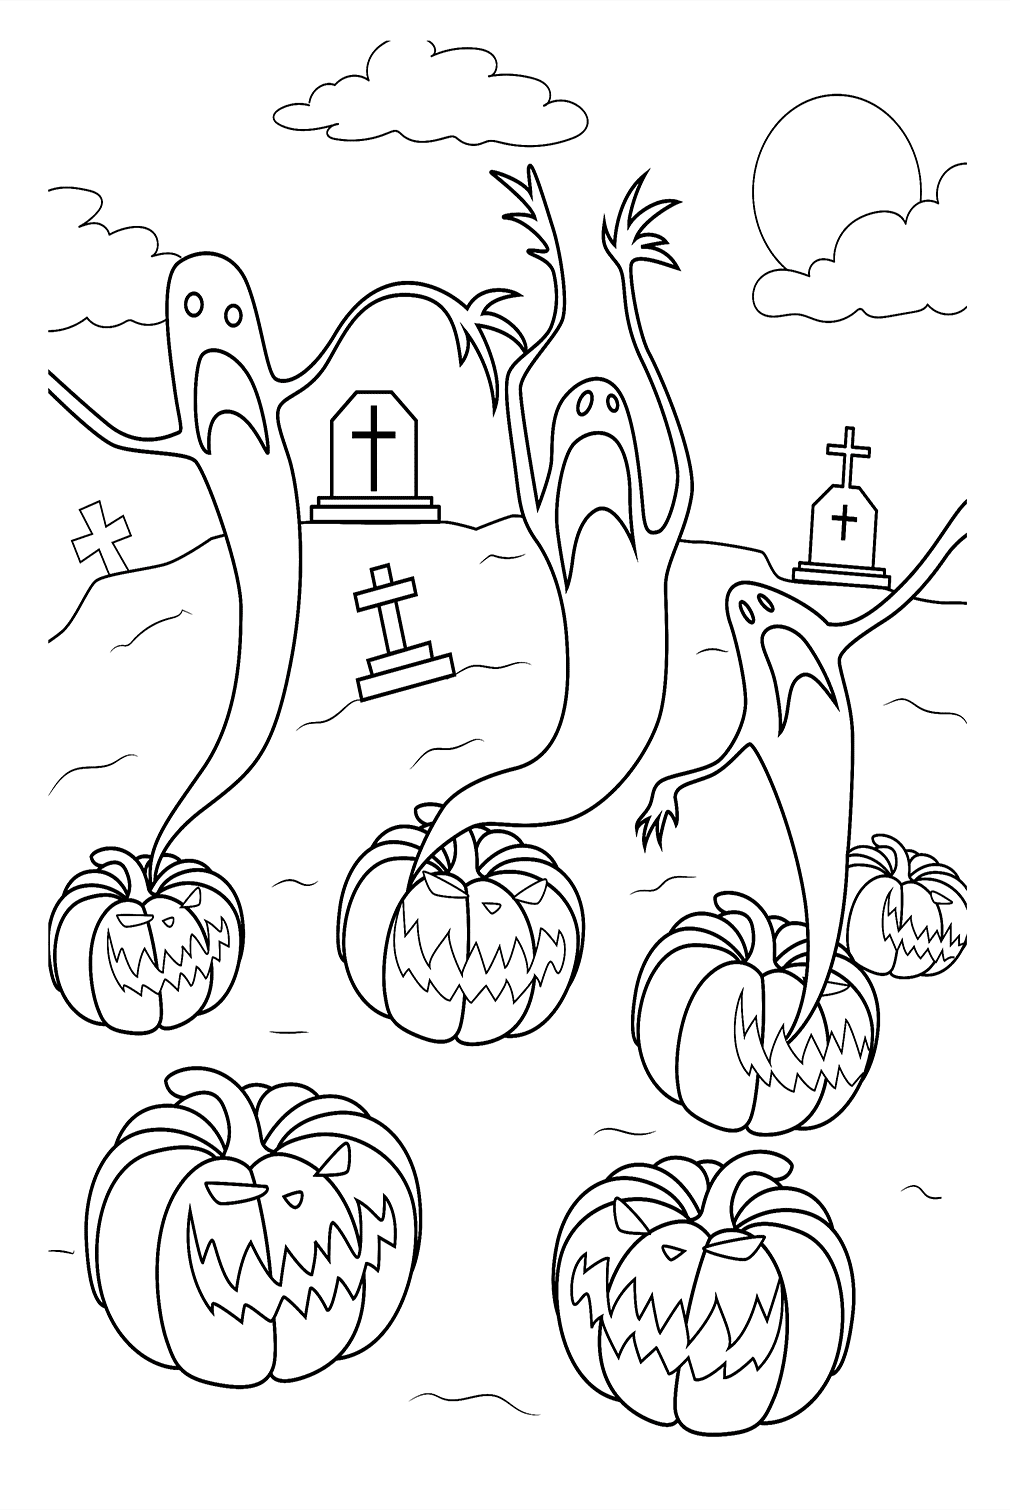 Eerie Ghost Coloring Page from Ghost